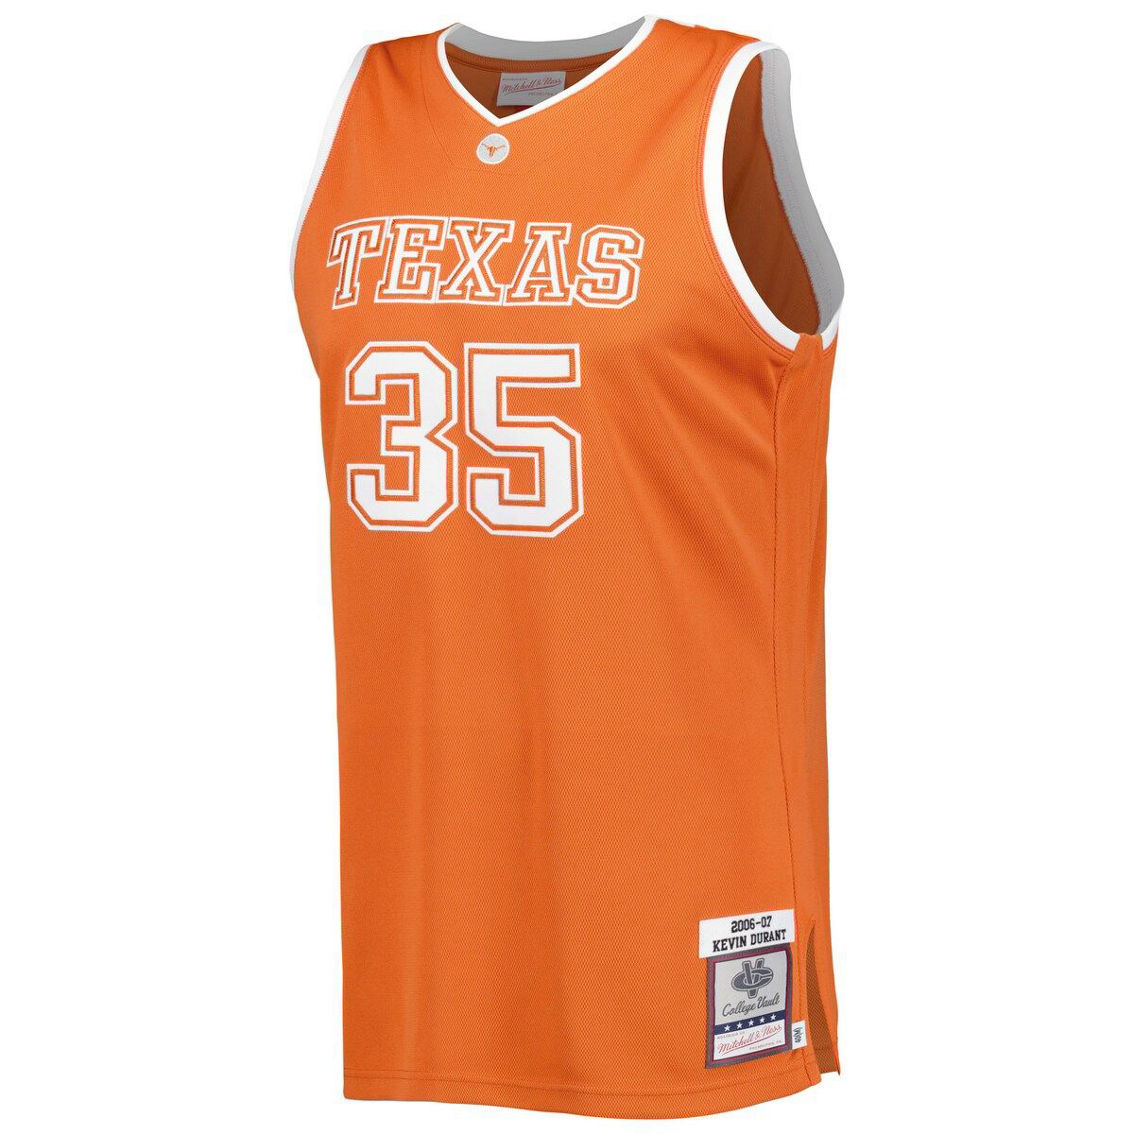 Mitchell & Ness Men's Kevin Durant Texas Orange Texas Longhorns Throwback Jersey - Image 3 of 4